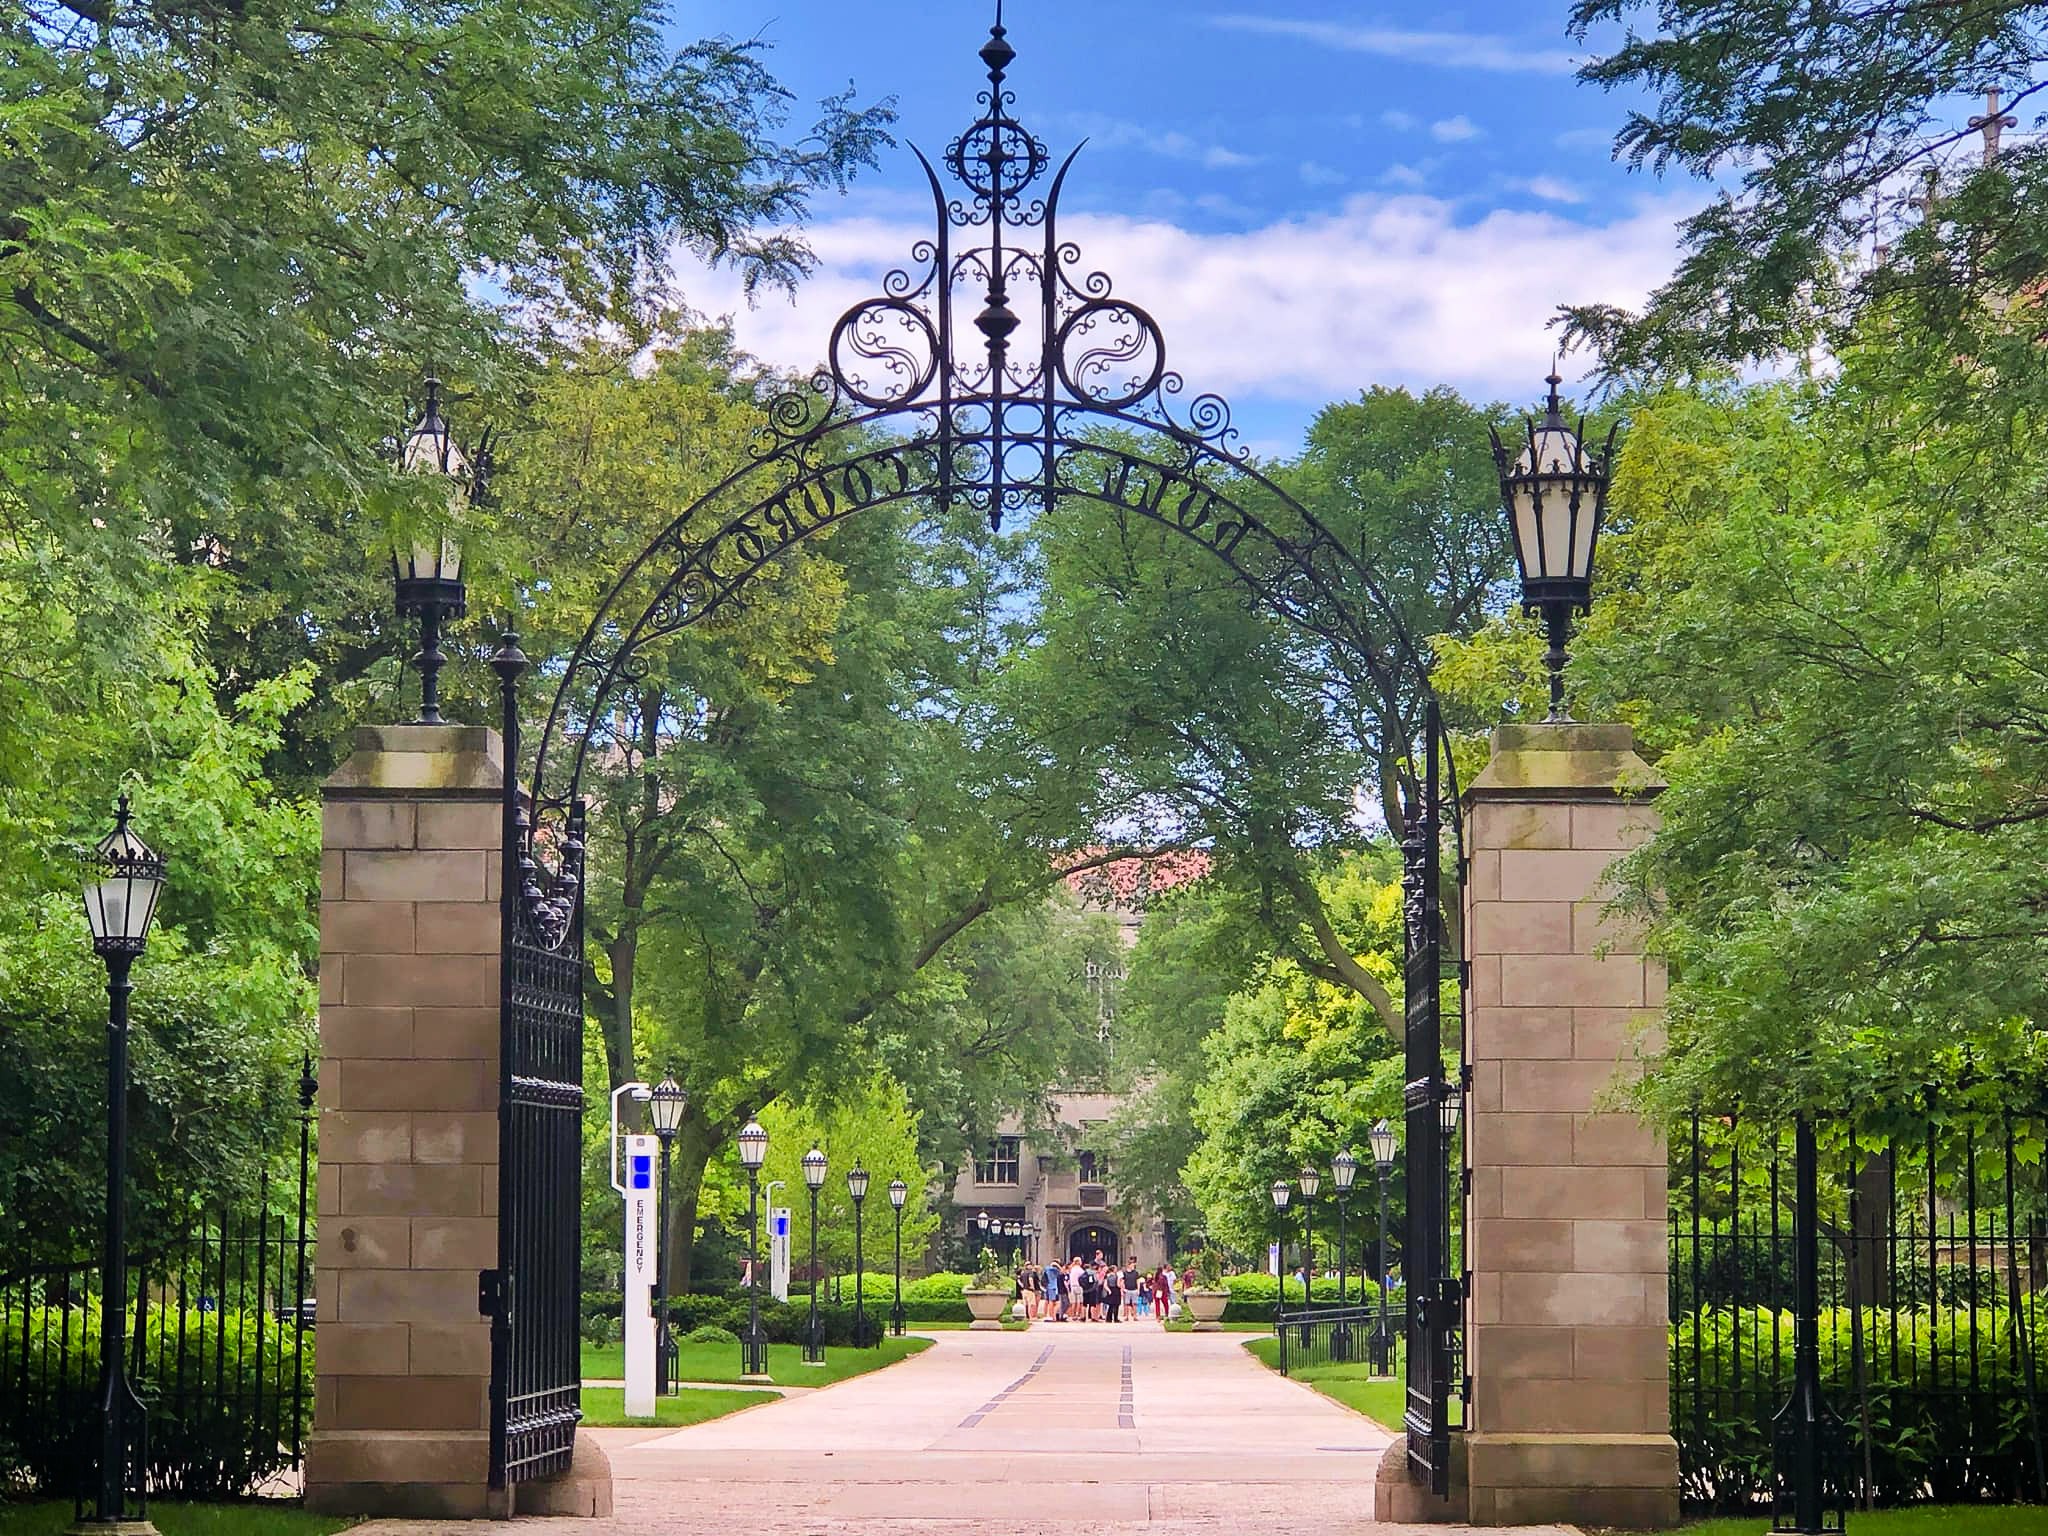 Hull Gate at the University of Chicago. Image by Drsitu at Wikimedia Commons. CC BY-SA 4.0 Int'l.